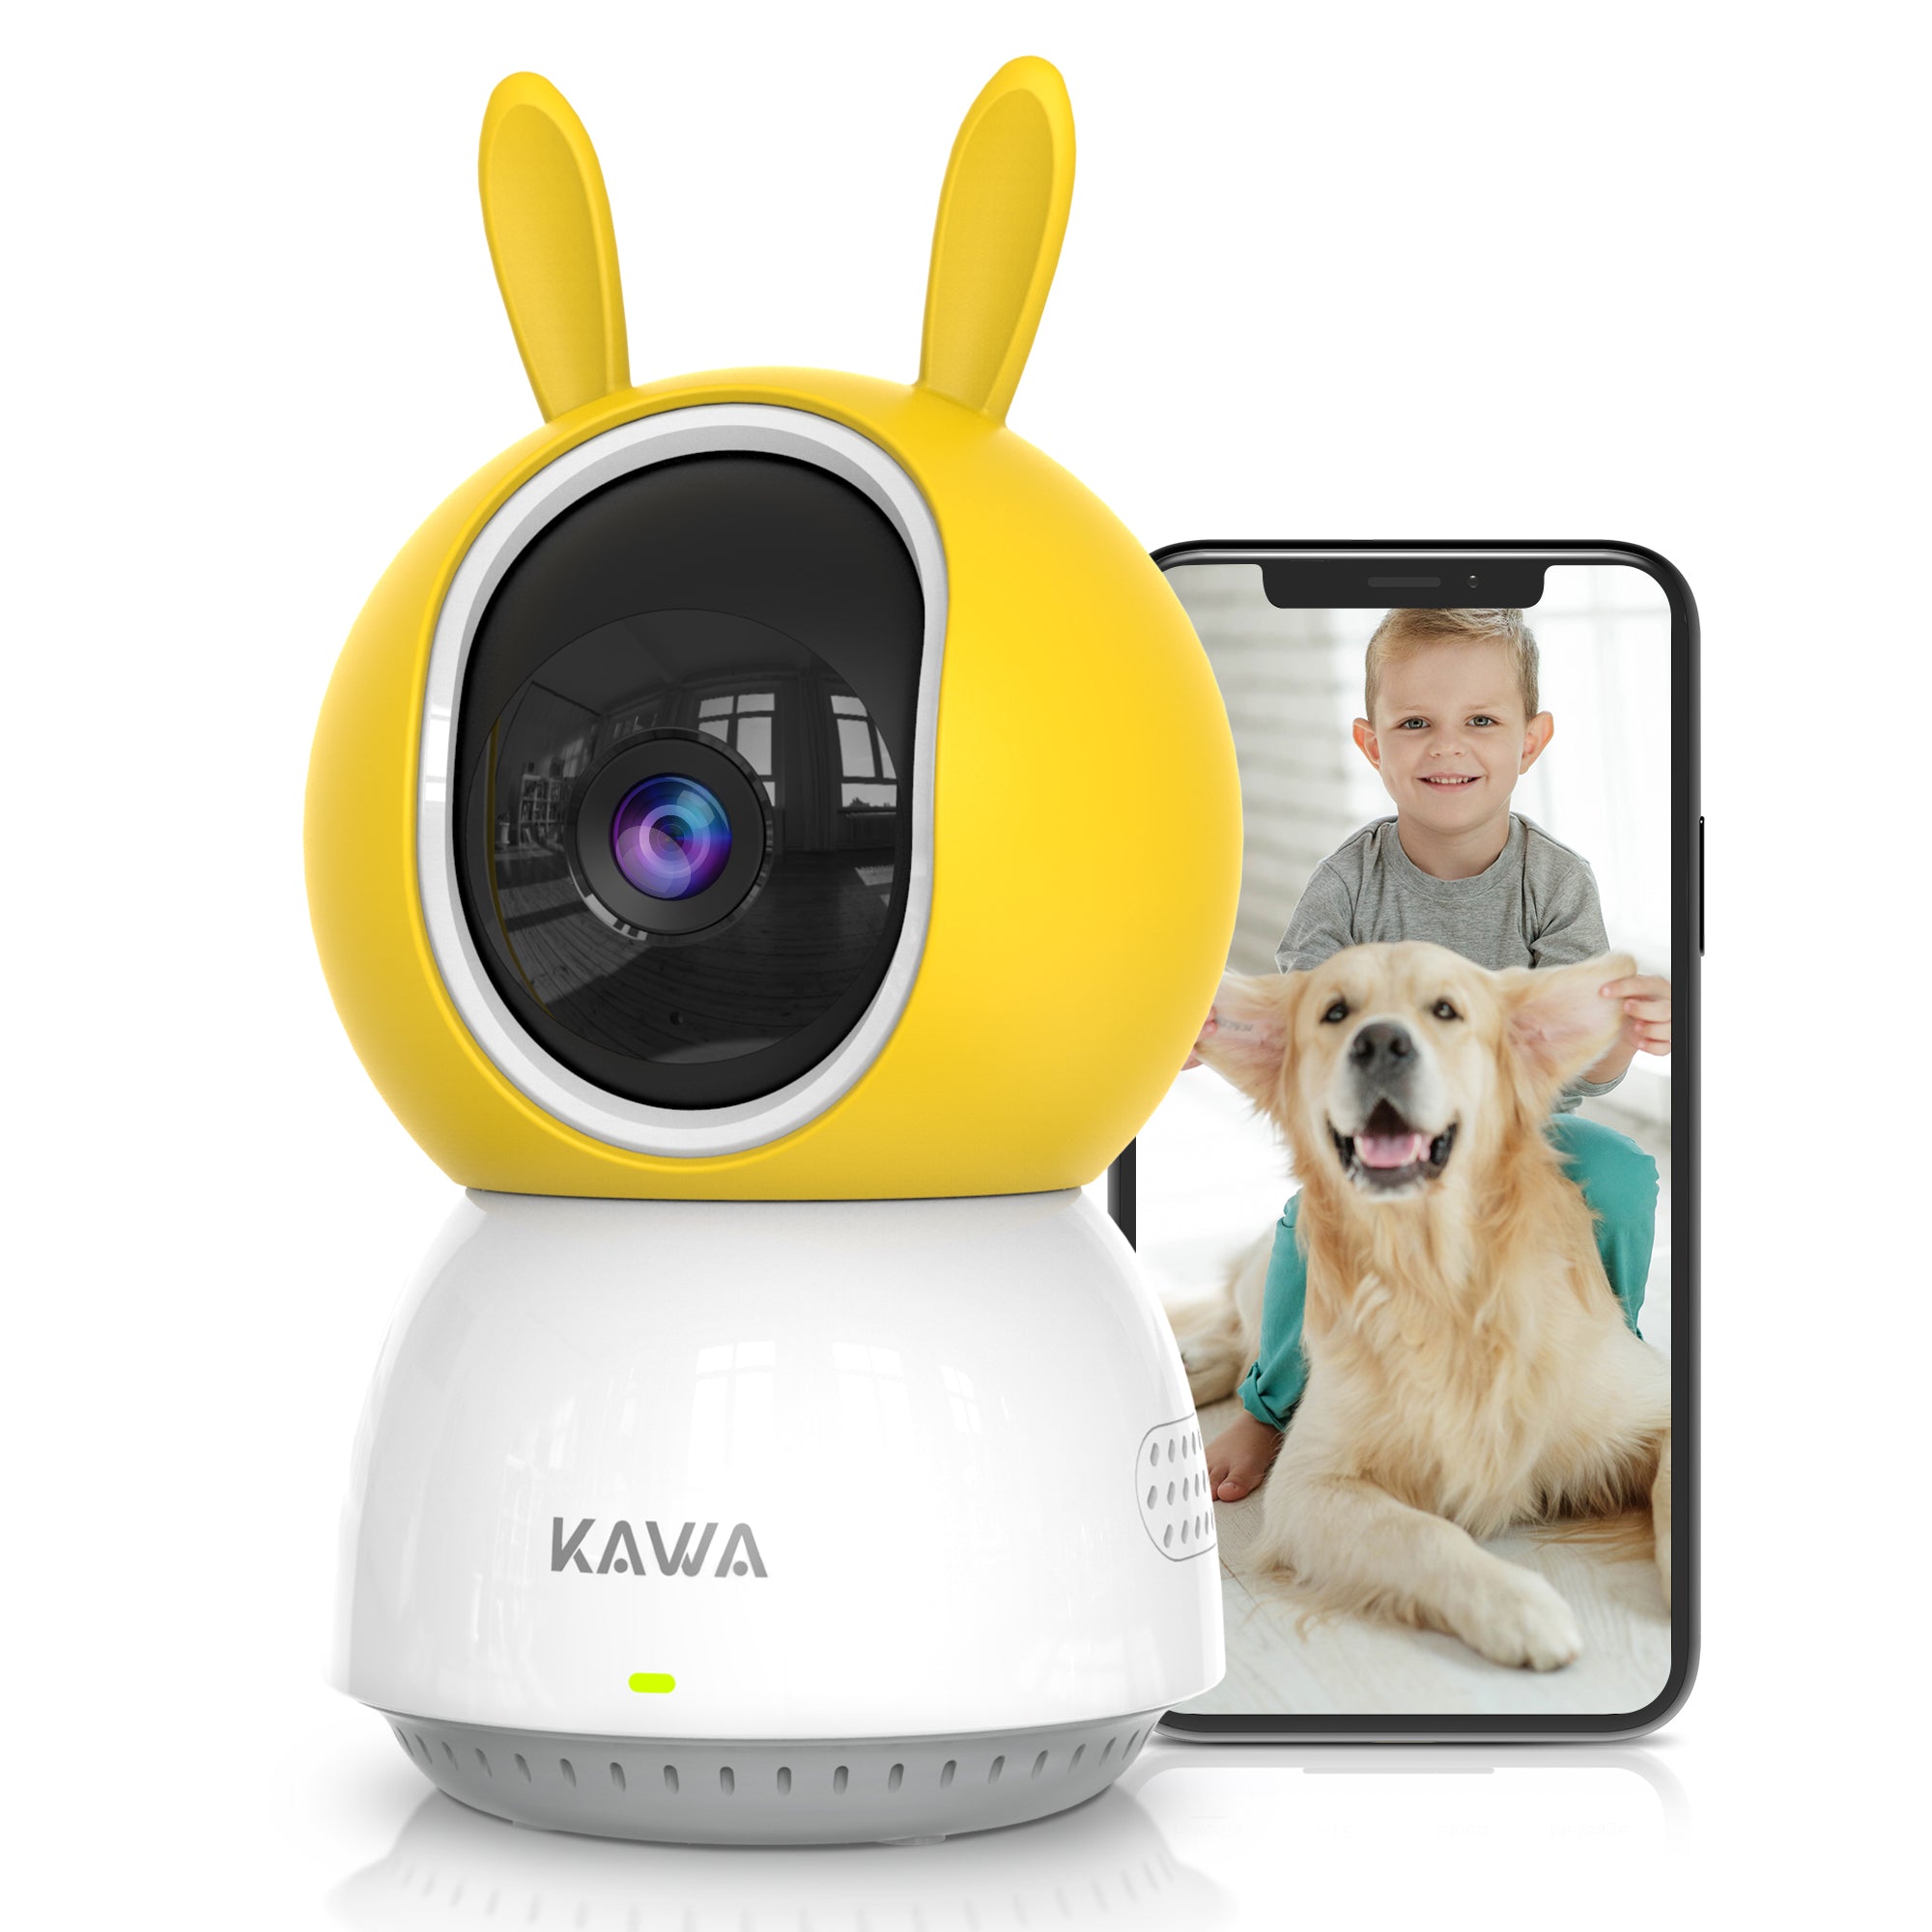 KAWA A6 Baby Monitor, 2K Indoor Security Camera, 2.4G WiFi 360 IP Cameras for Home Security, Pet Camera, 2-Way Audio, Night Vision, Motion Detection, Cloud/TF Card Storage, Works with Alexa